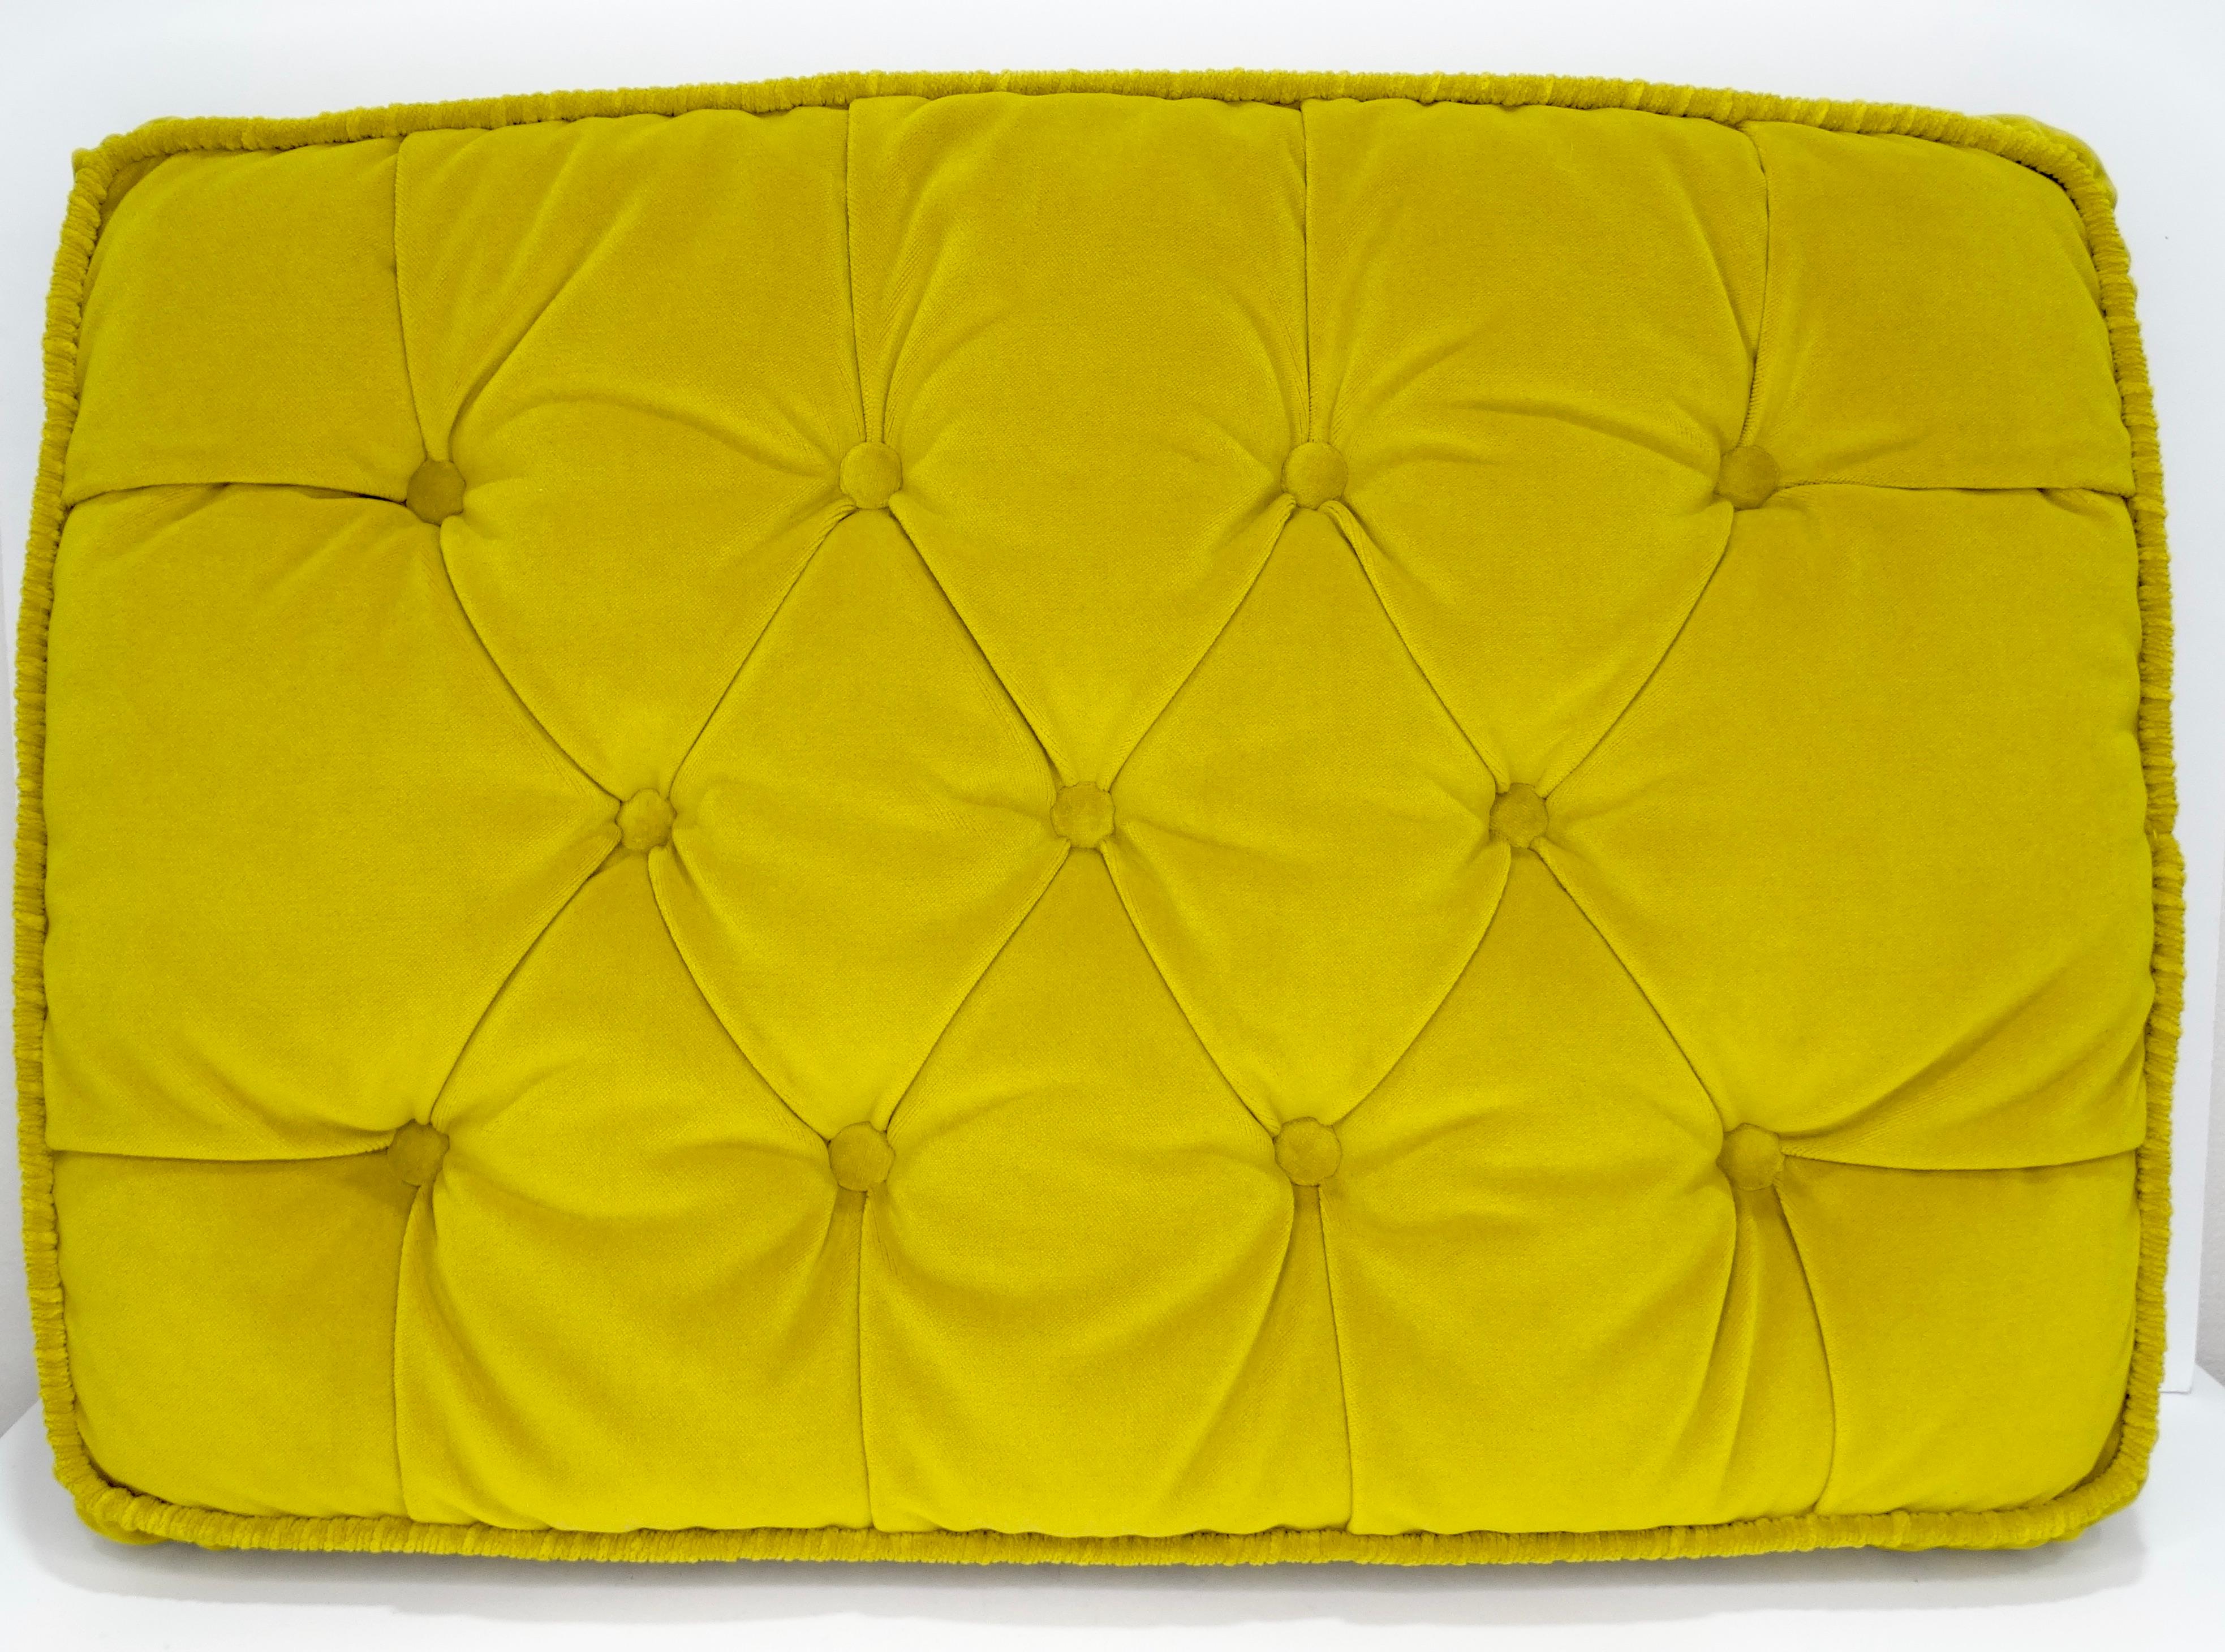 Gucci Embroidered Velvet Yellow Pillow Cushion For Sale 5